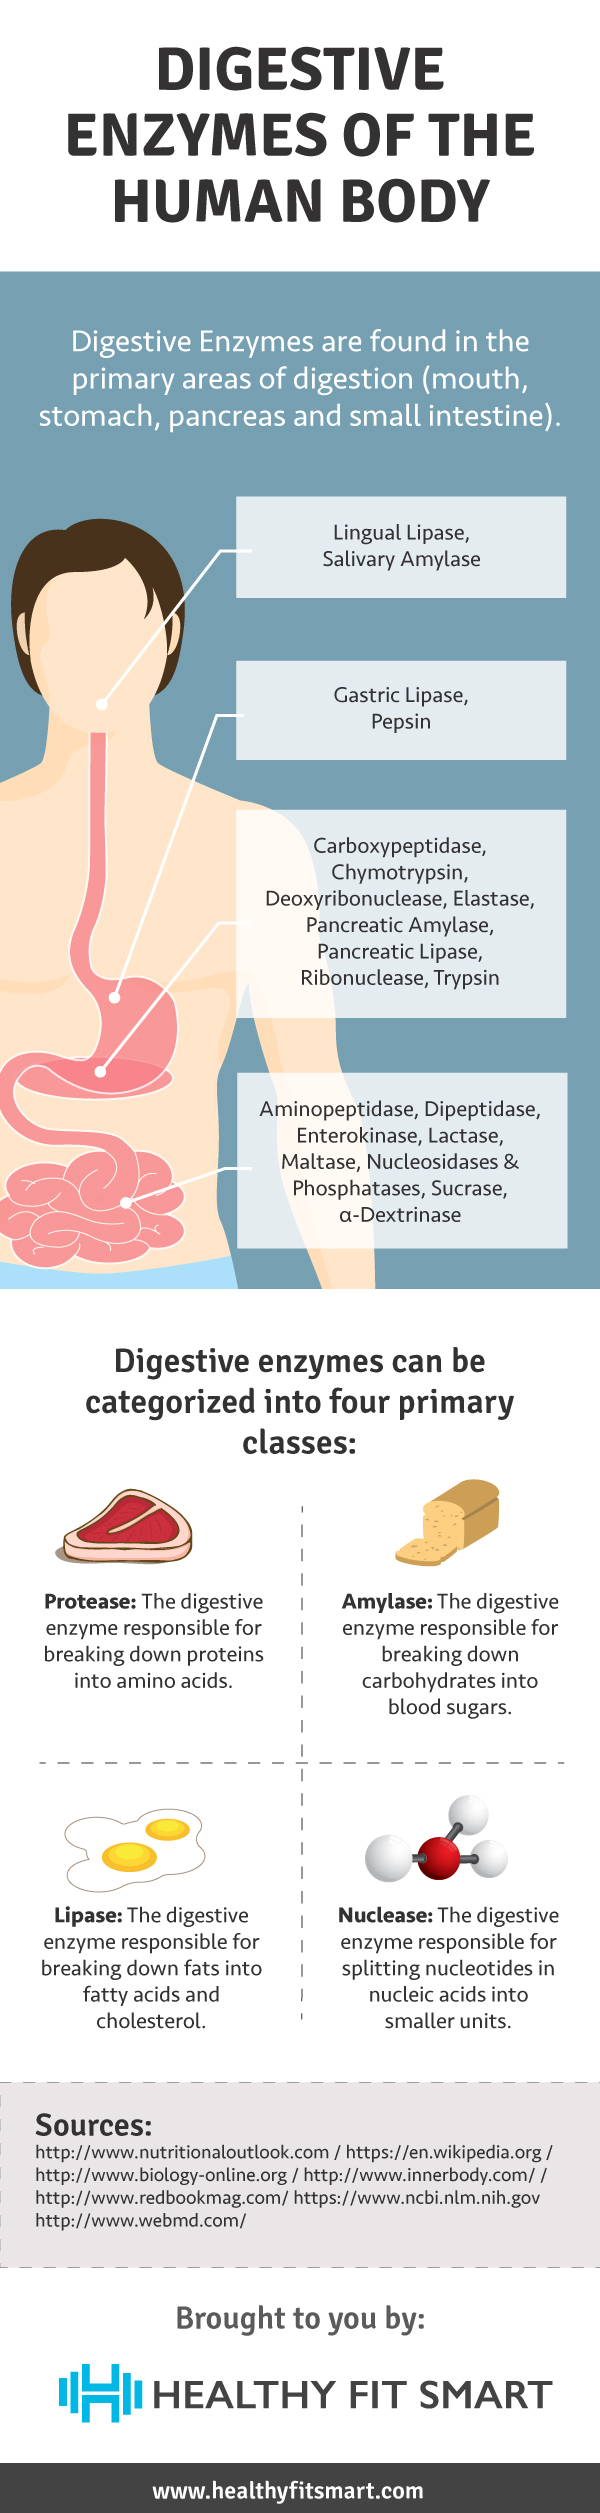 Digestive Enzymes Infographic